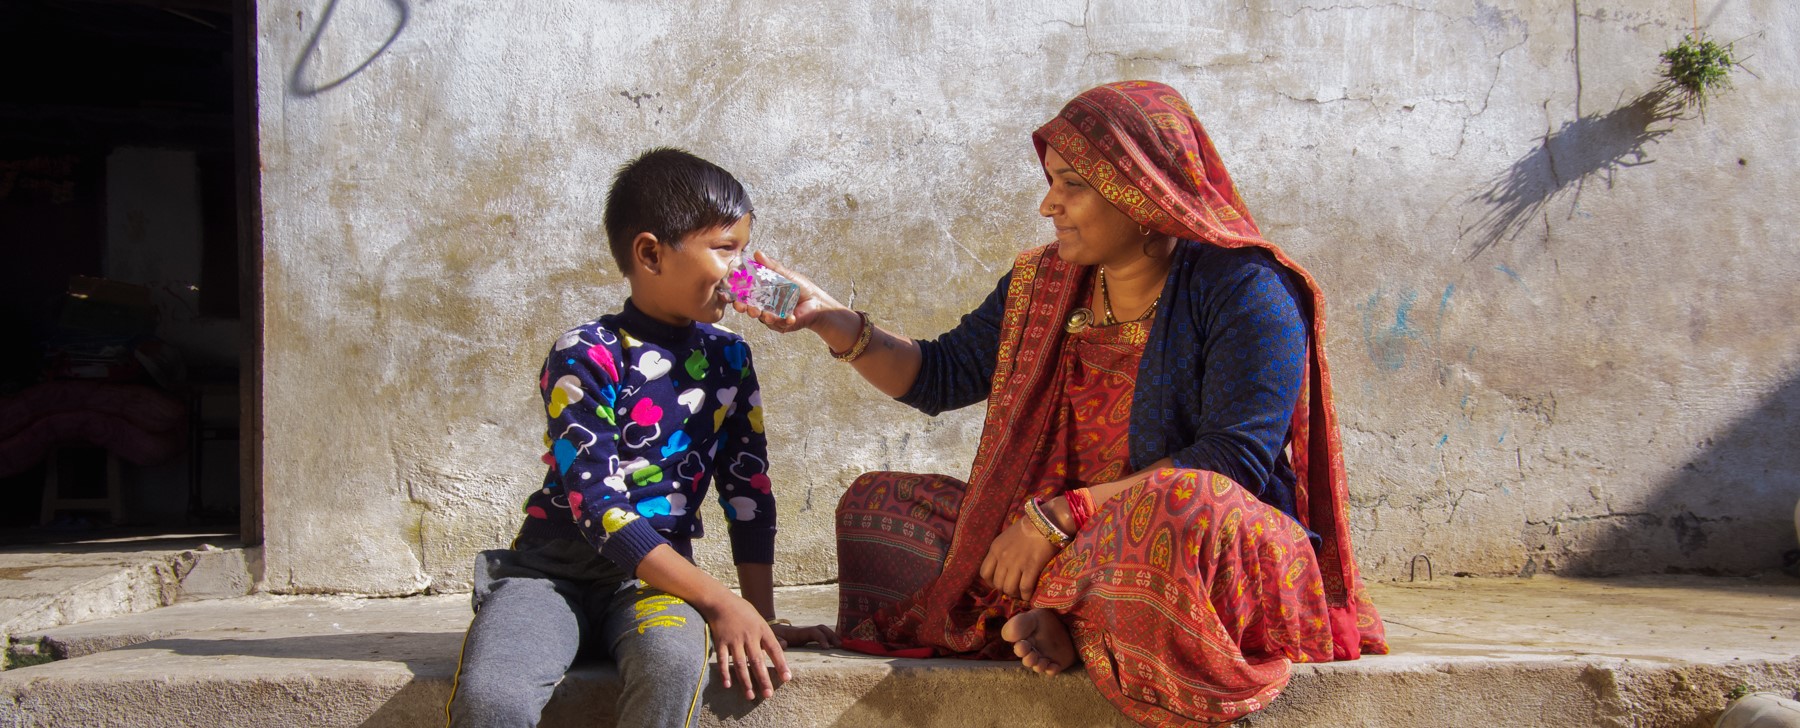 A woman from Jamgod village in Madhya Pradesh gives potable water to a young child to drink.